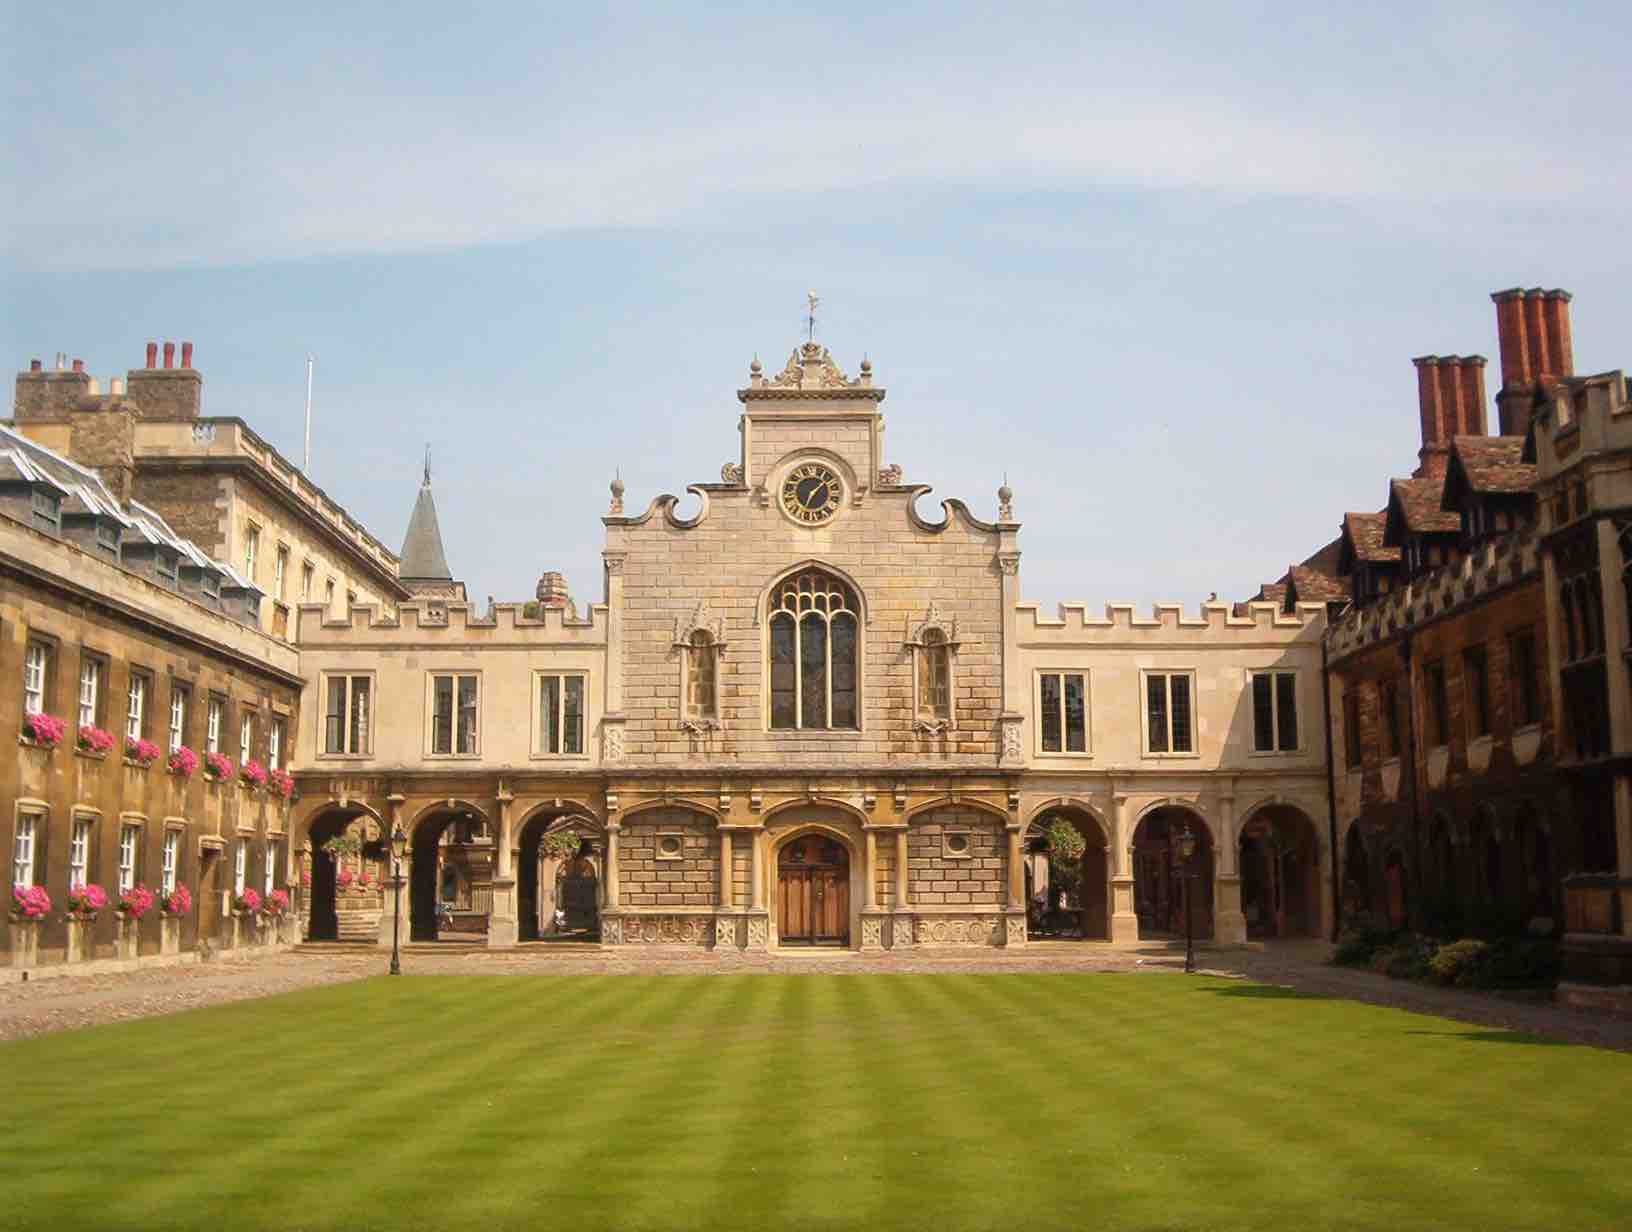 Dr Spencer co-organised the 2014 Medico-Legal Pain Conference, held on 26 September 2014 at Peterhouse College, Cambridge